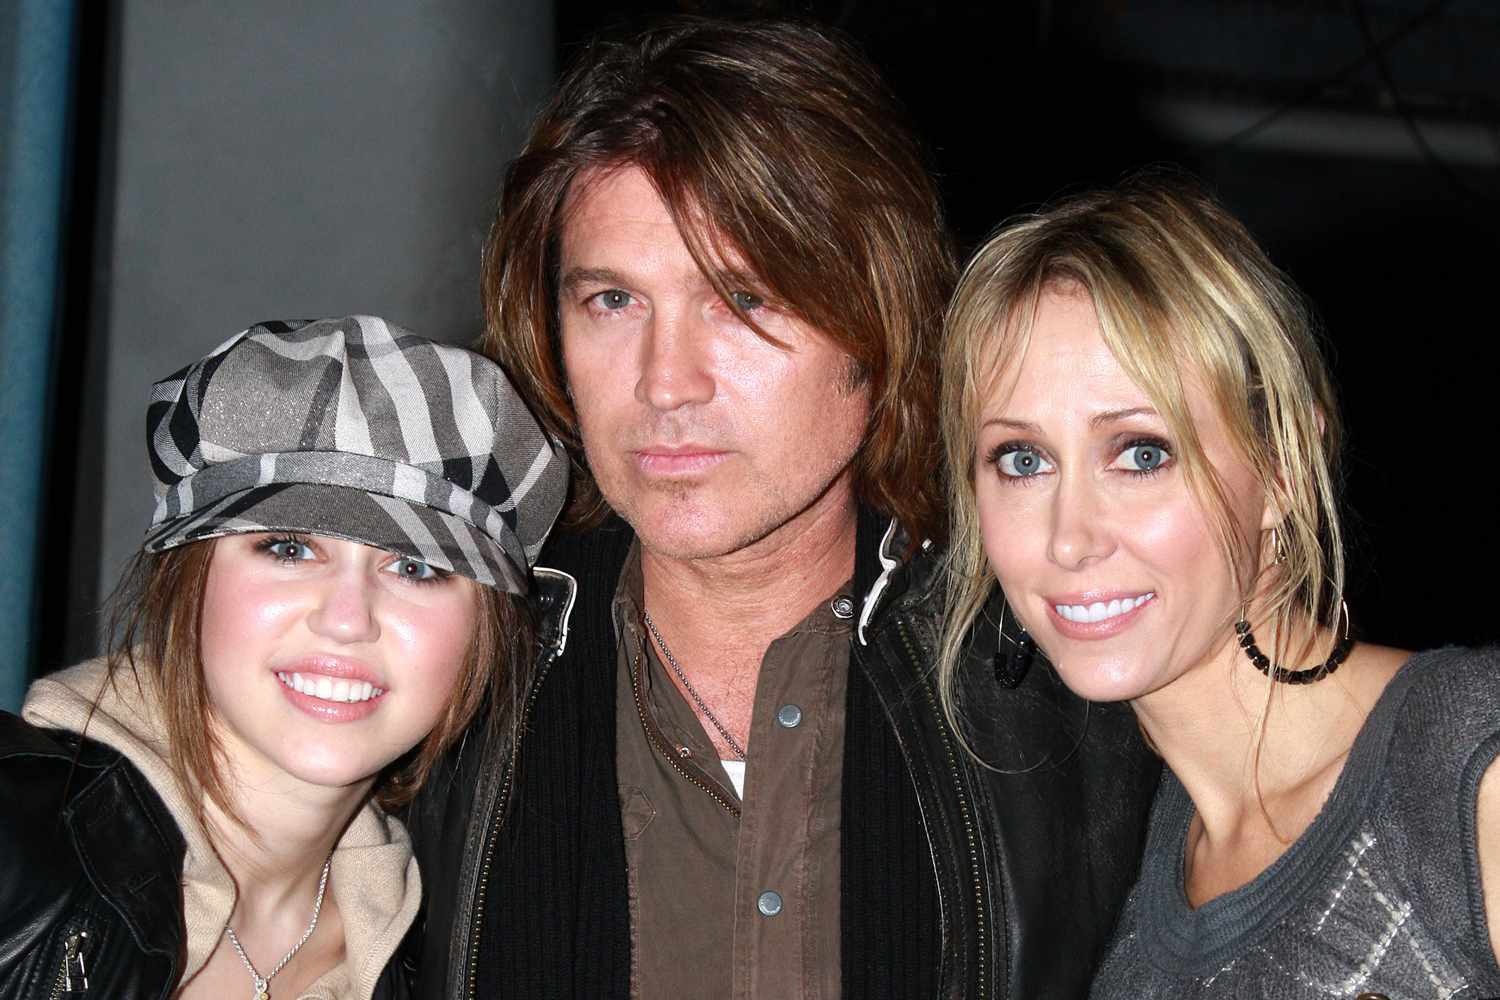 Tish Cyrus Reveals She Pushed Billy Ray To Star In ‘Hannah Montana’ For Sake Of Family